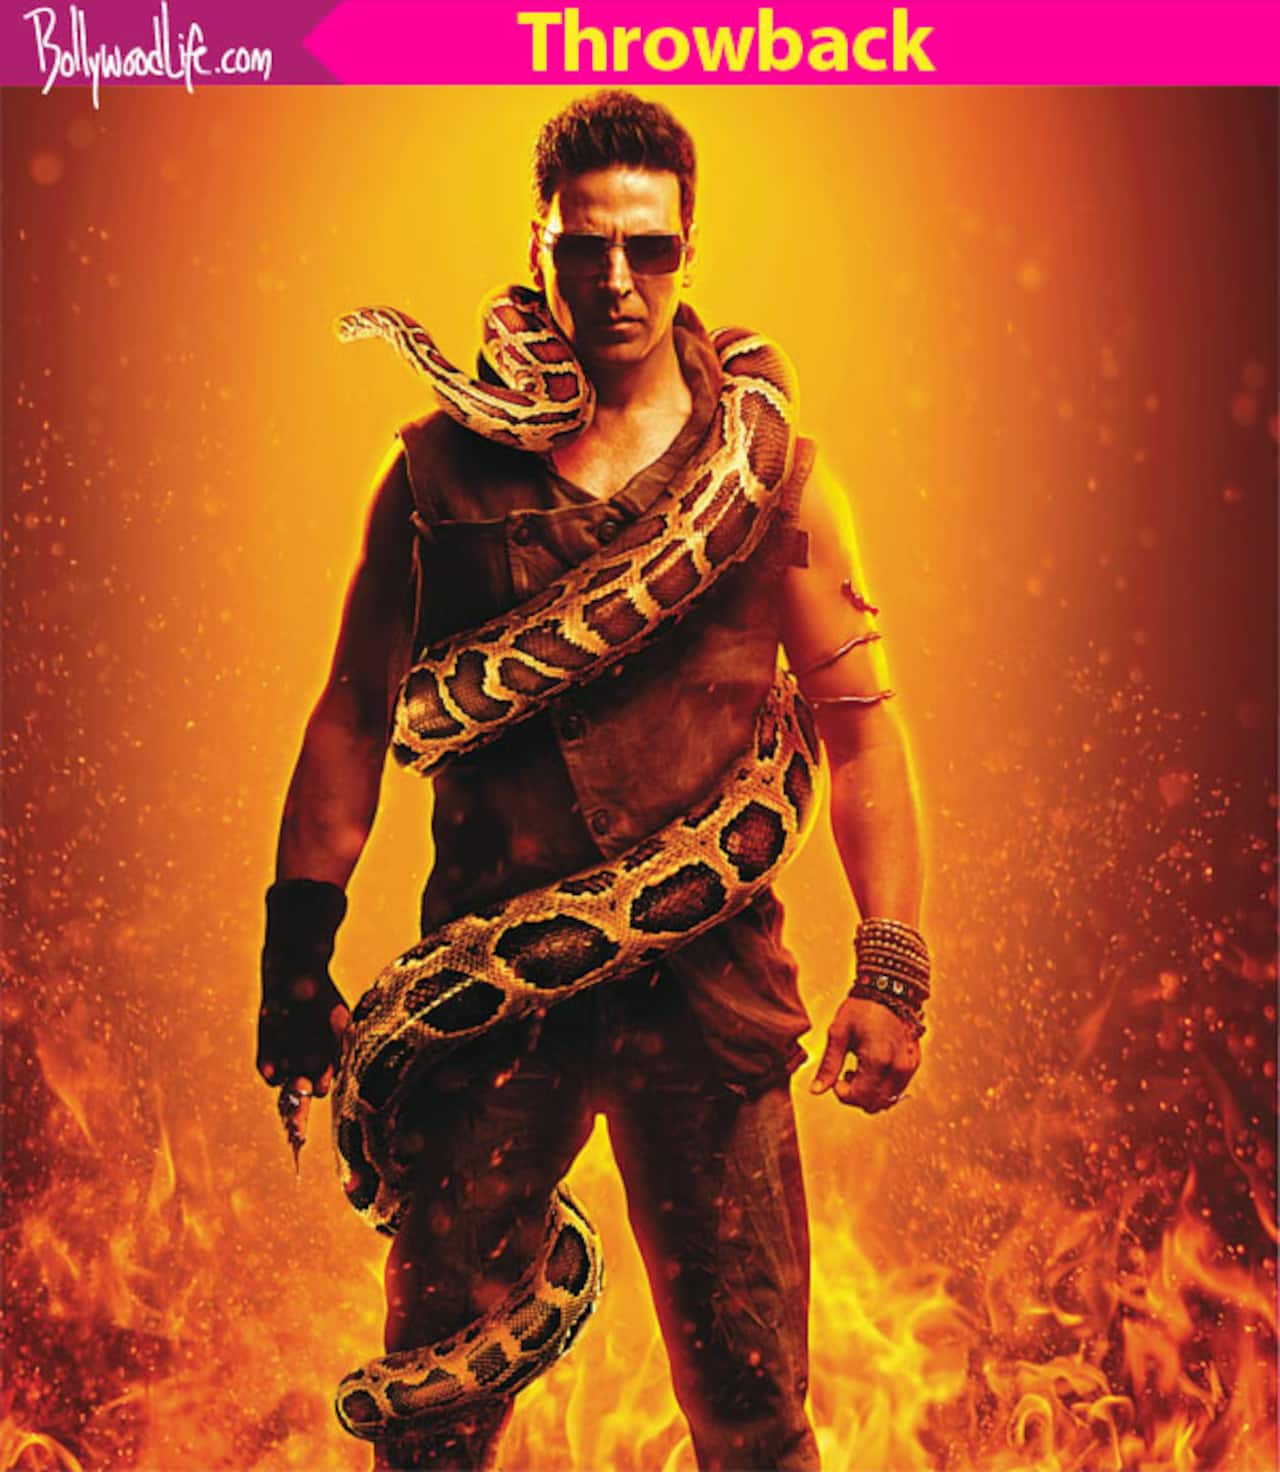 Did you know Akshay Kumar turned into a snake in a film?